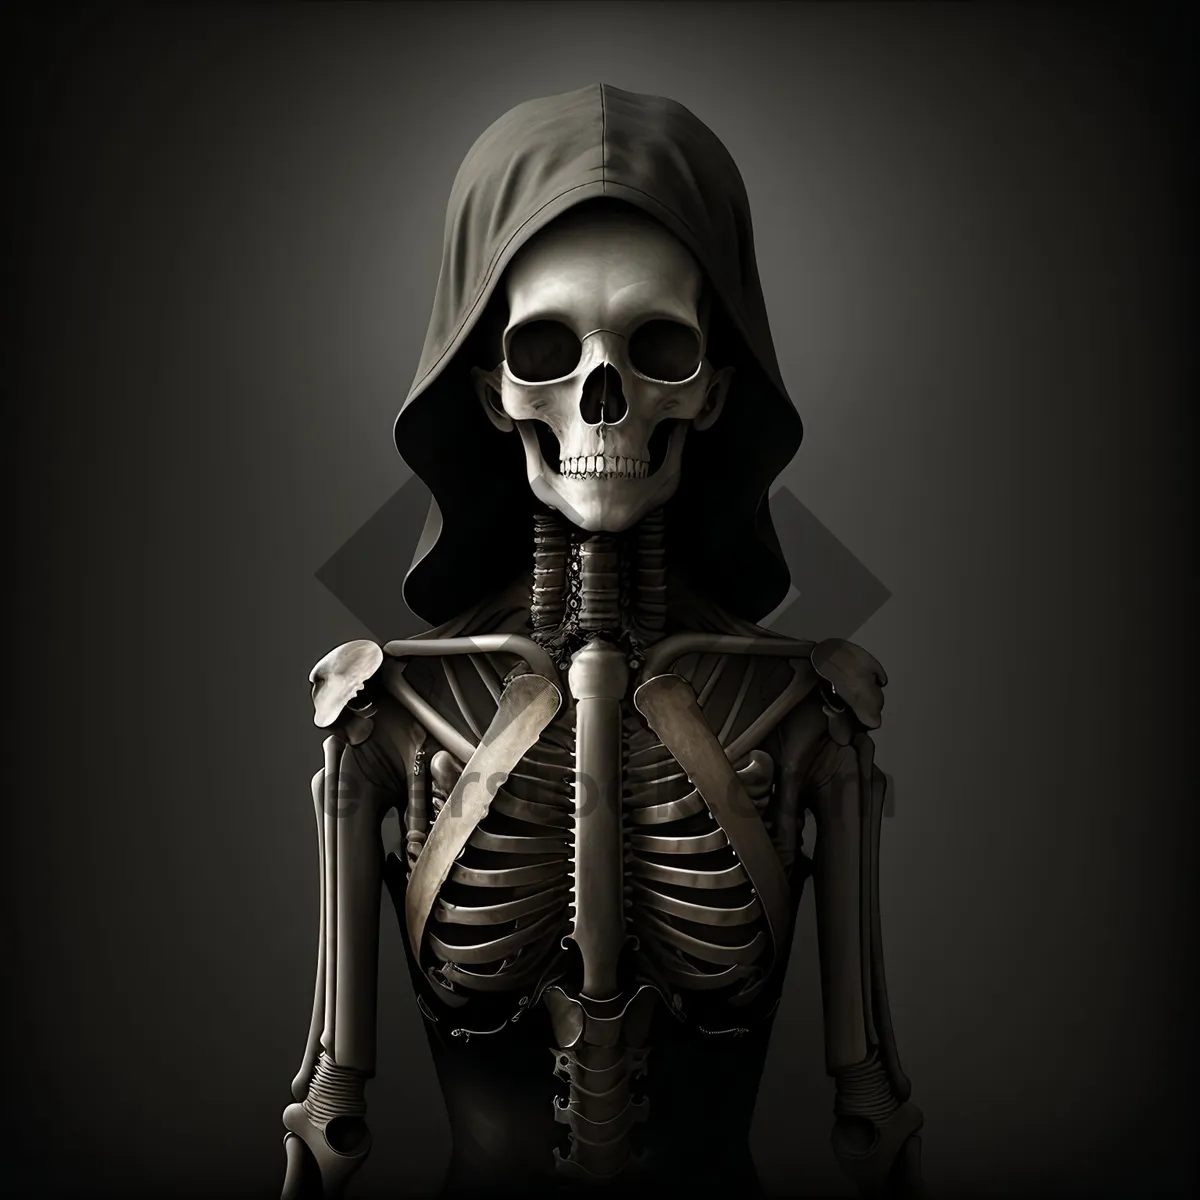 Picture of Macabre Man: Anatomical Skeleton Head in Black